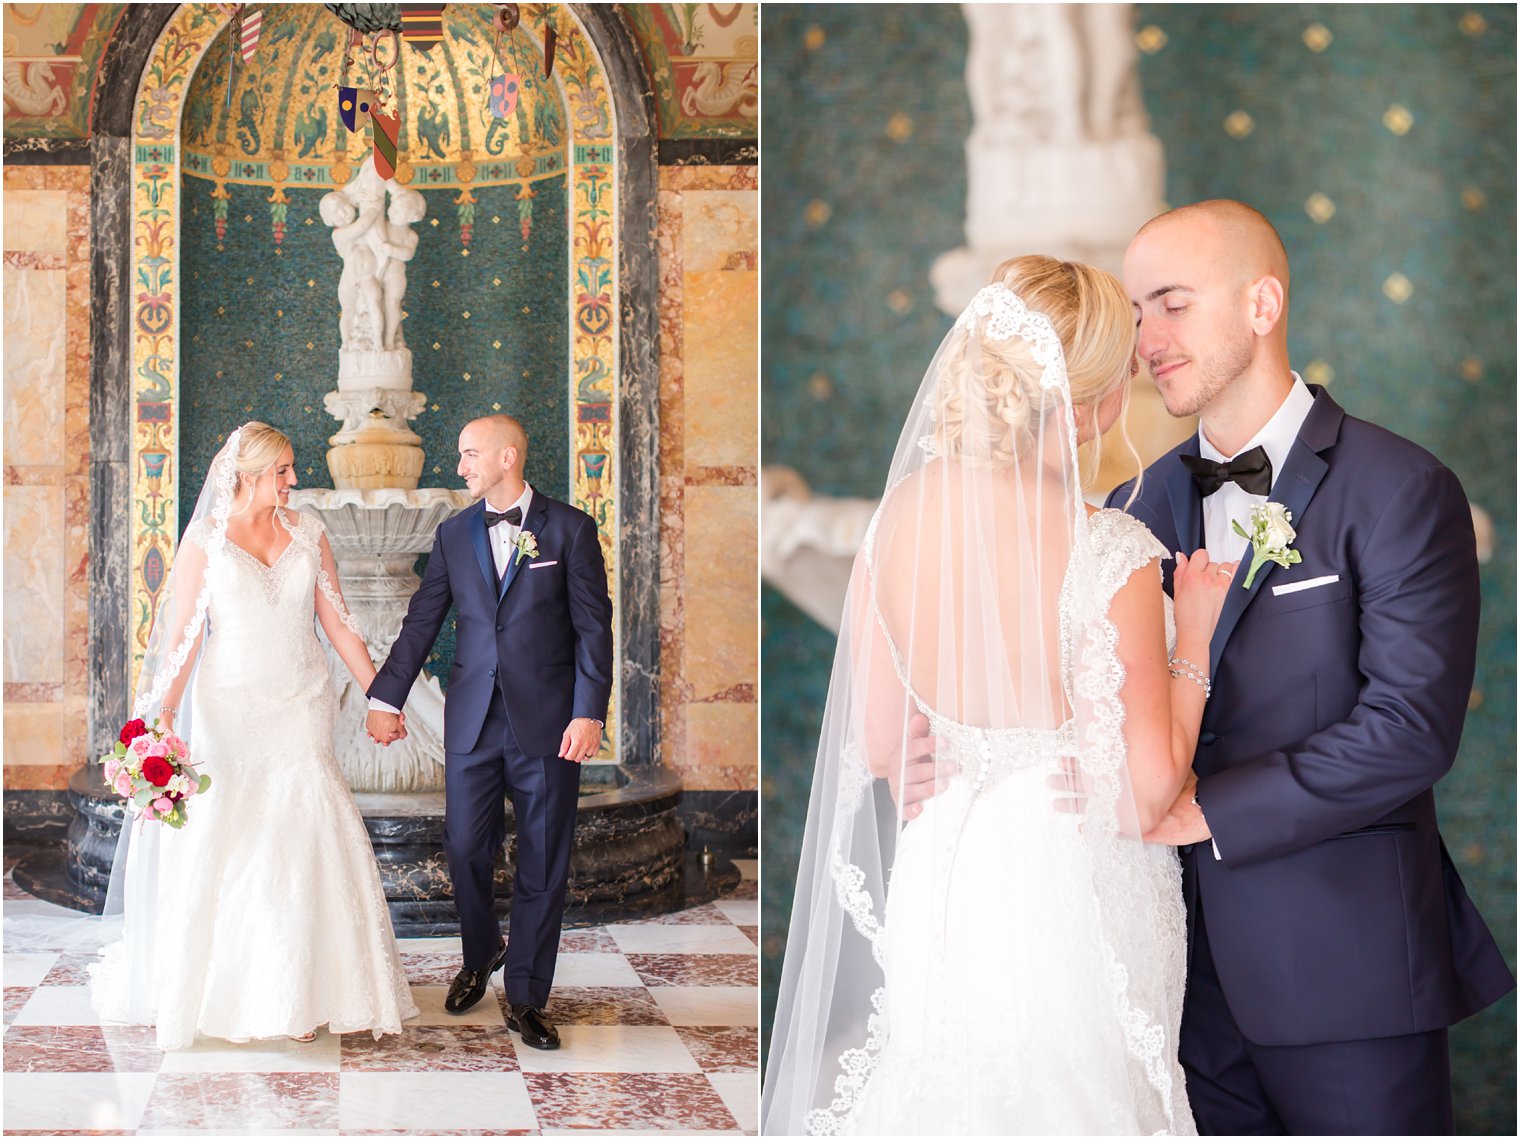 Classic bride and groom photos at Monmouth University